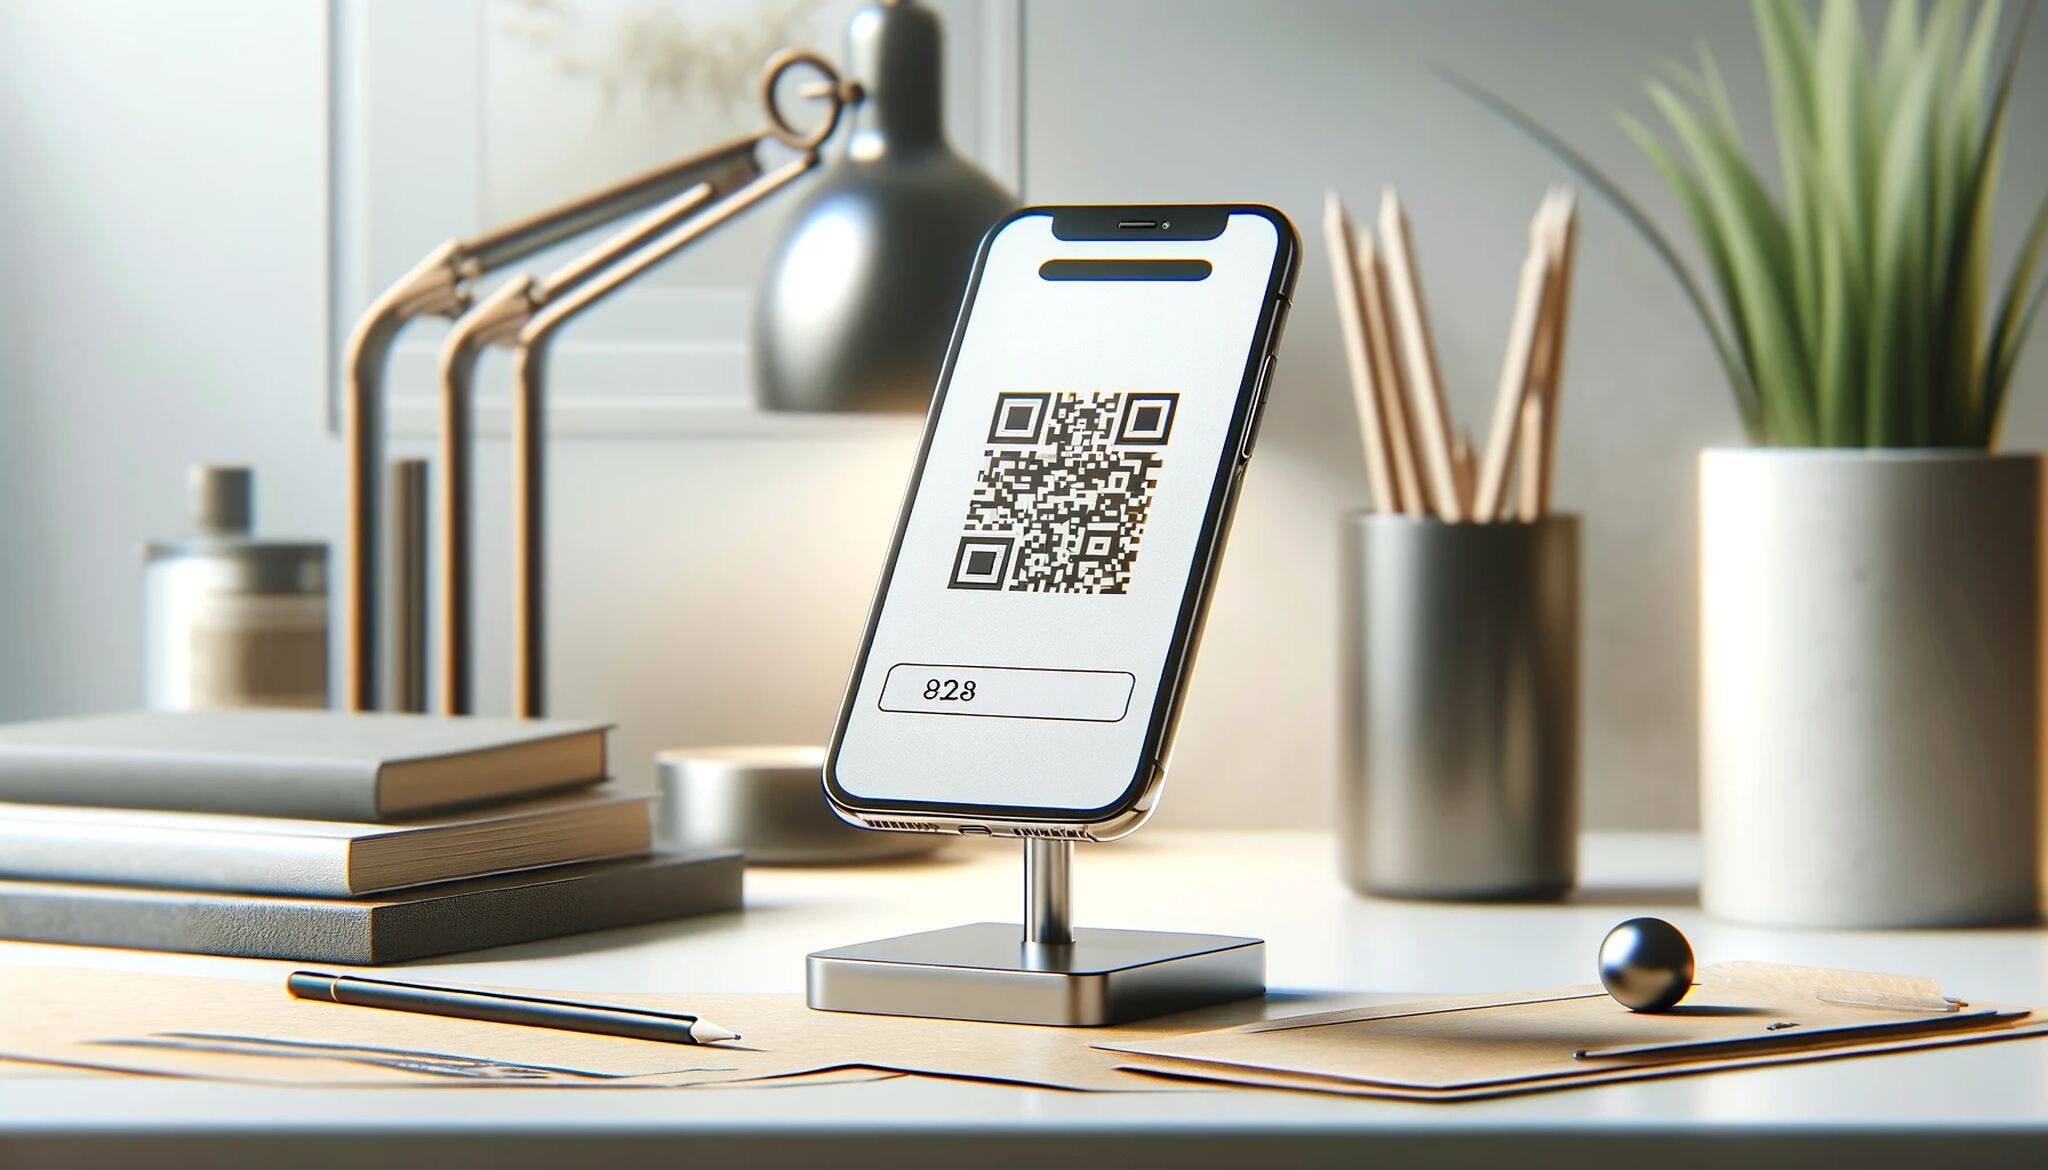 minimalist desk setup with a smartphone on a stand, displaying a QR code on screen